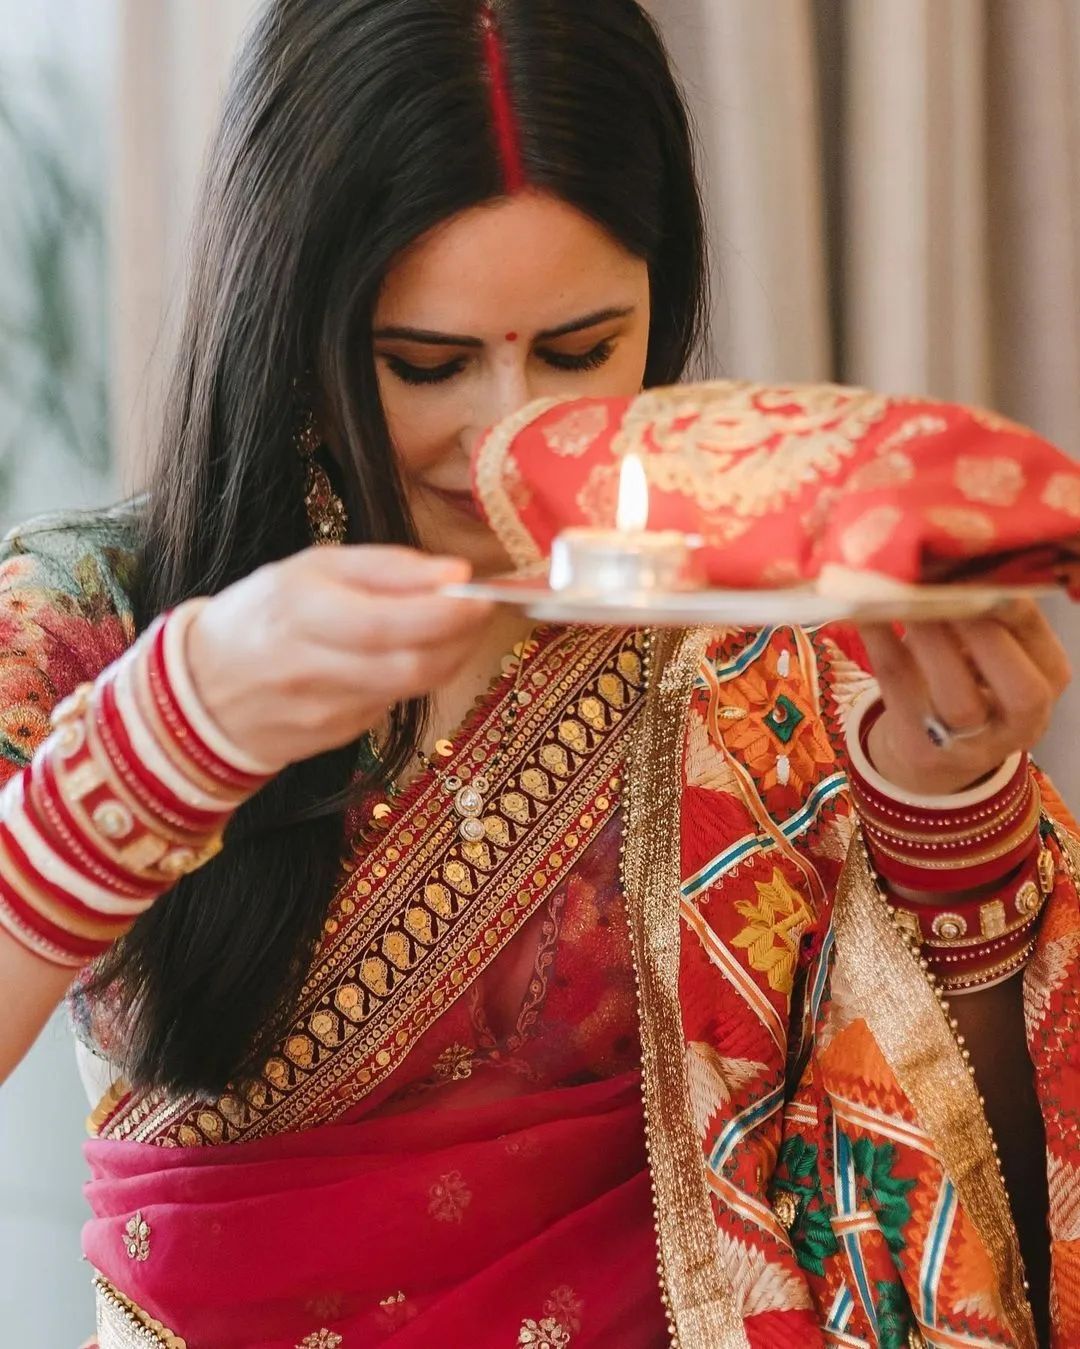 90+ Karwa Chauth Stock Videos and Royalty-Free Footage - iStock